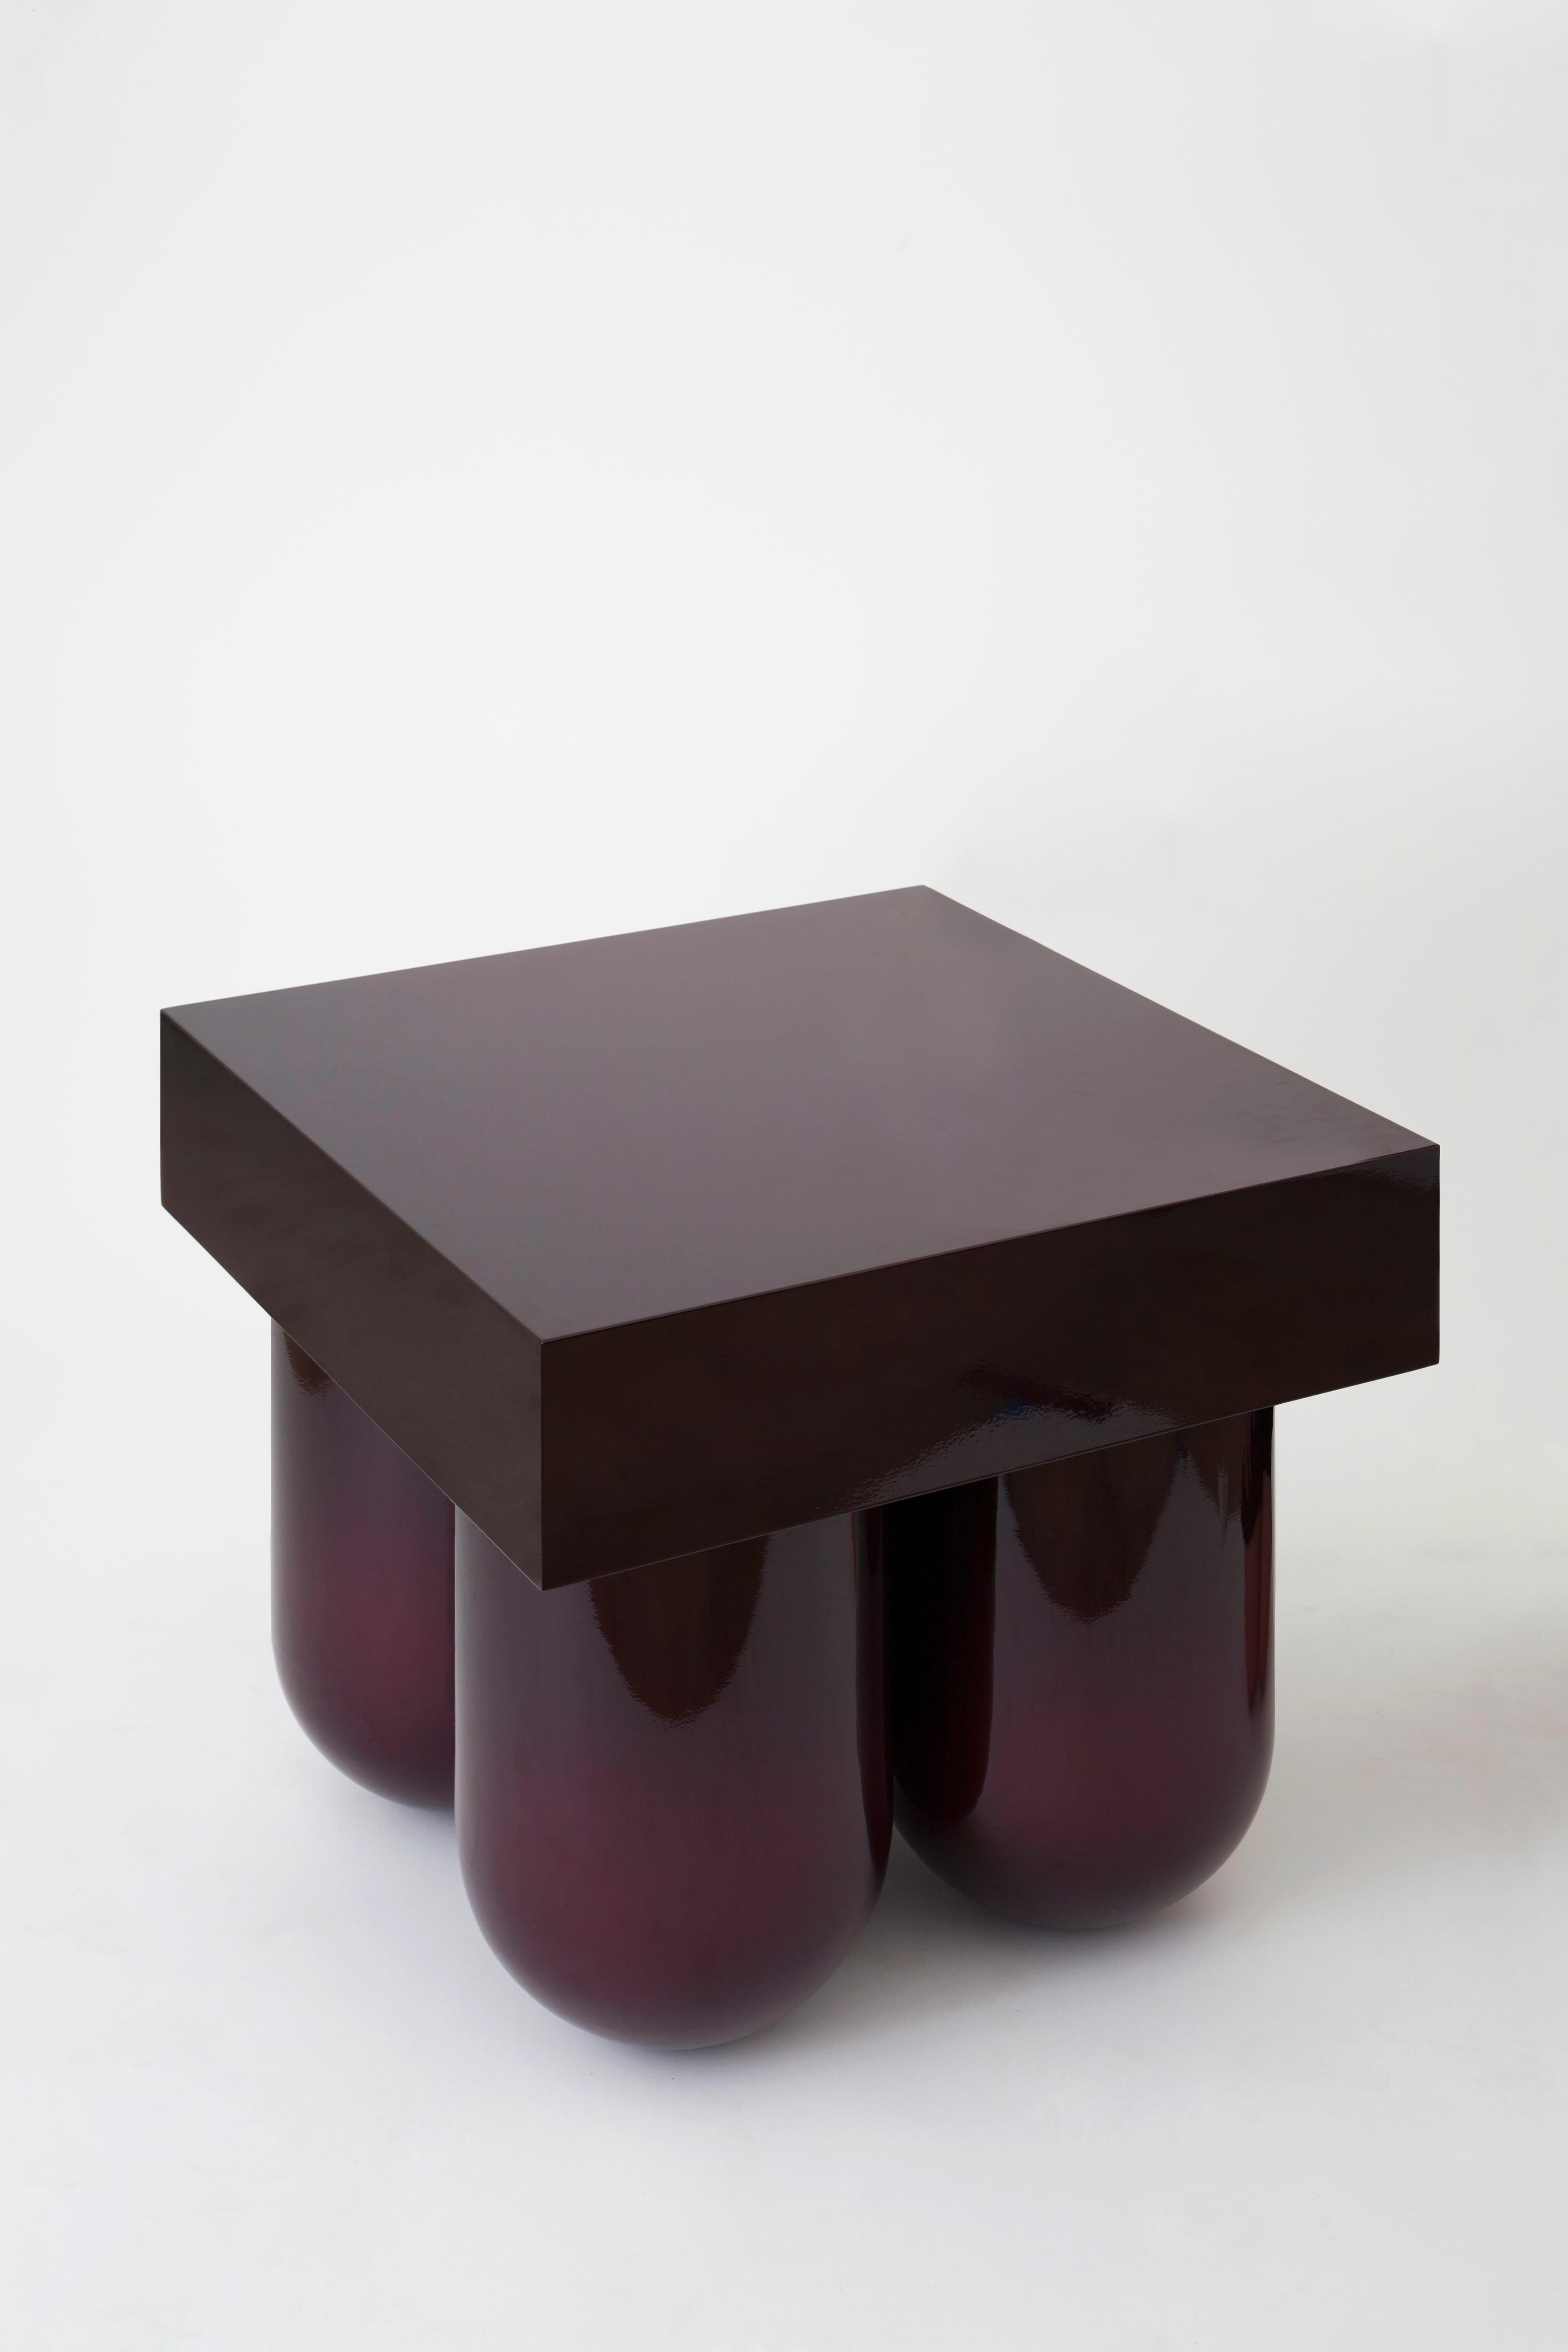 Carved wood set no. 5 table by Müsing-Sellés
Dimensions: W 60 x D 60 x H 60 cm
Materials: Carved Wood, high gloss car-paint metallic lacquer

Color finish options: maroon/red gradient
indigo/blue gradient
custom color (additional cost & lead